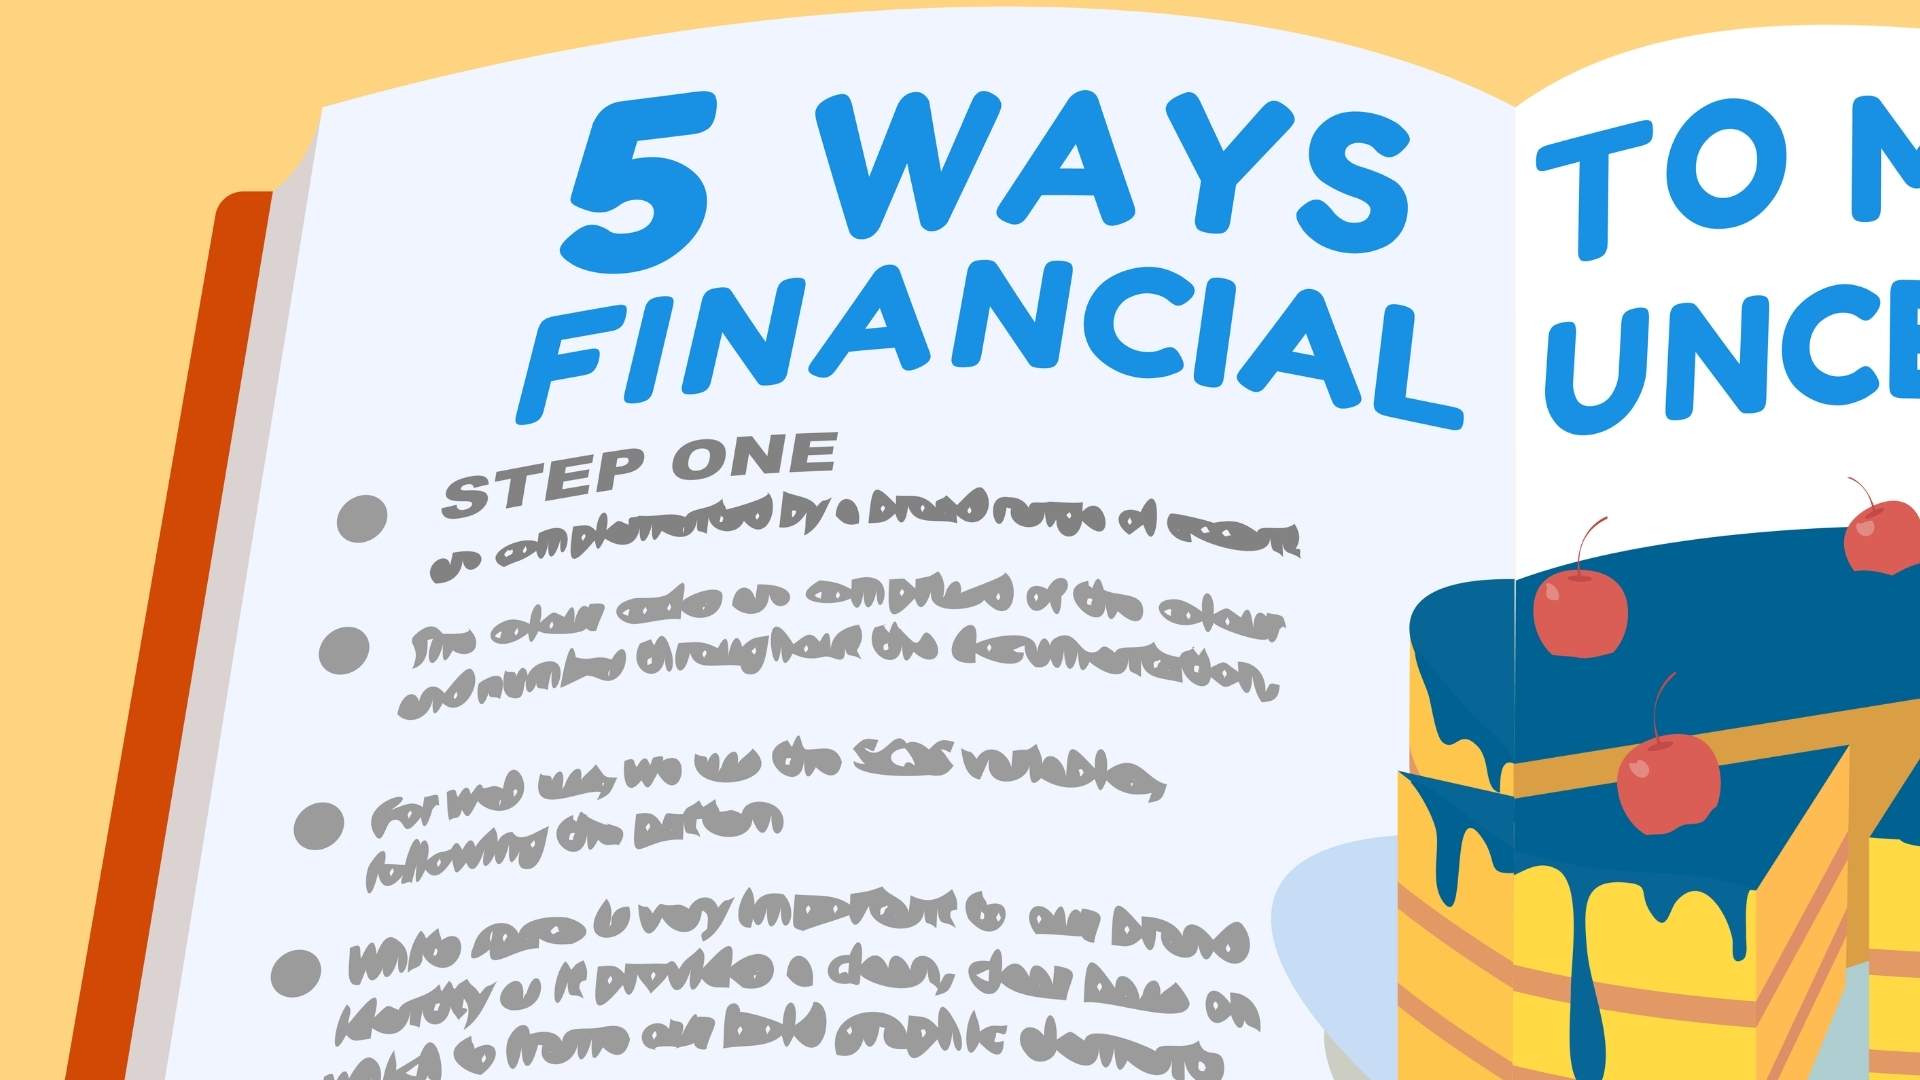 How to deal with financial uncertainty? - Animated video